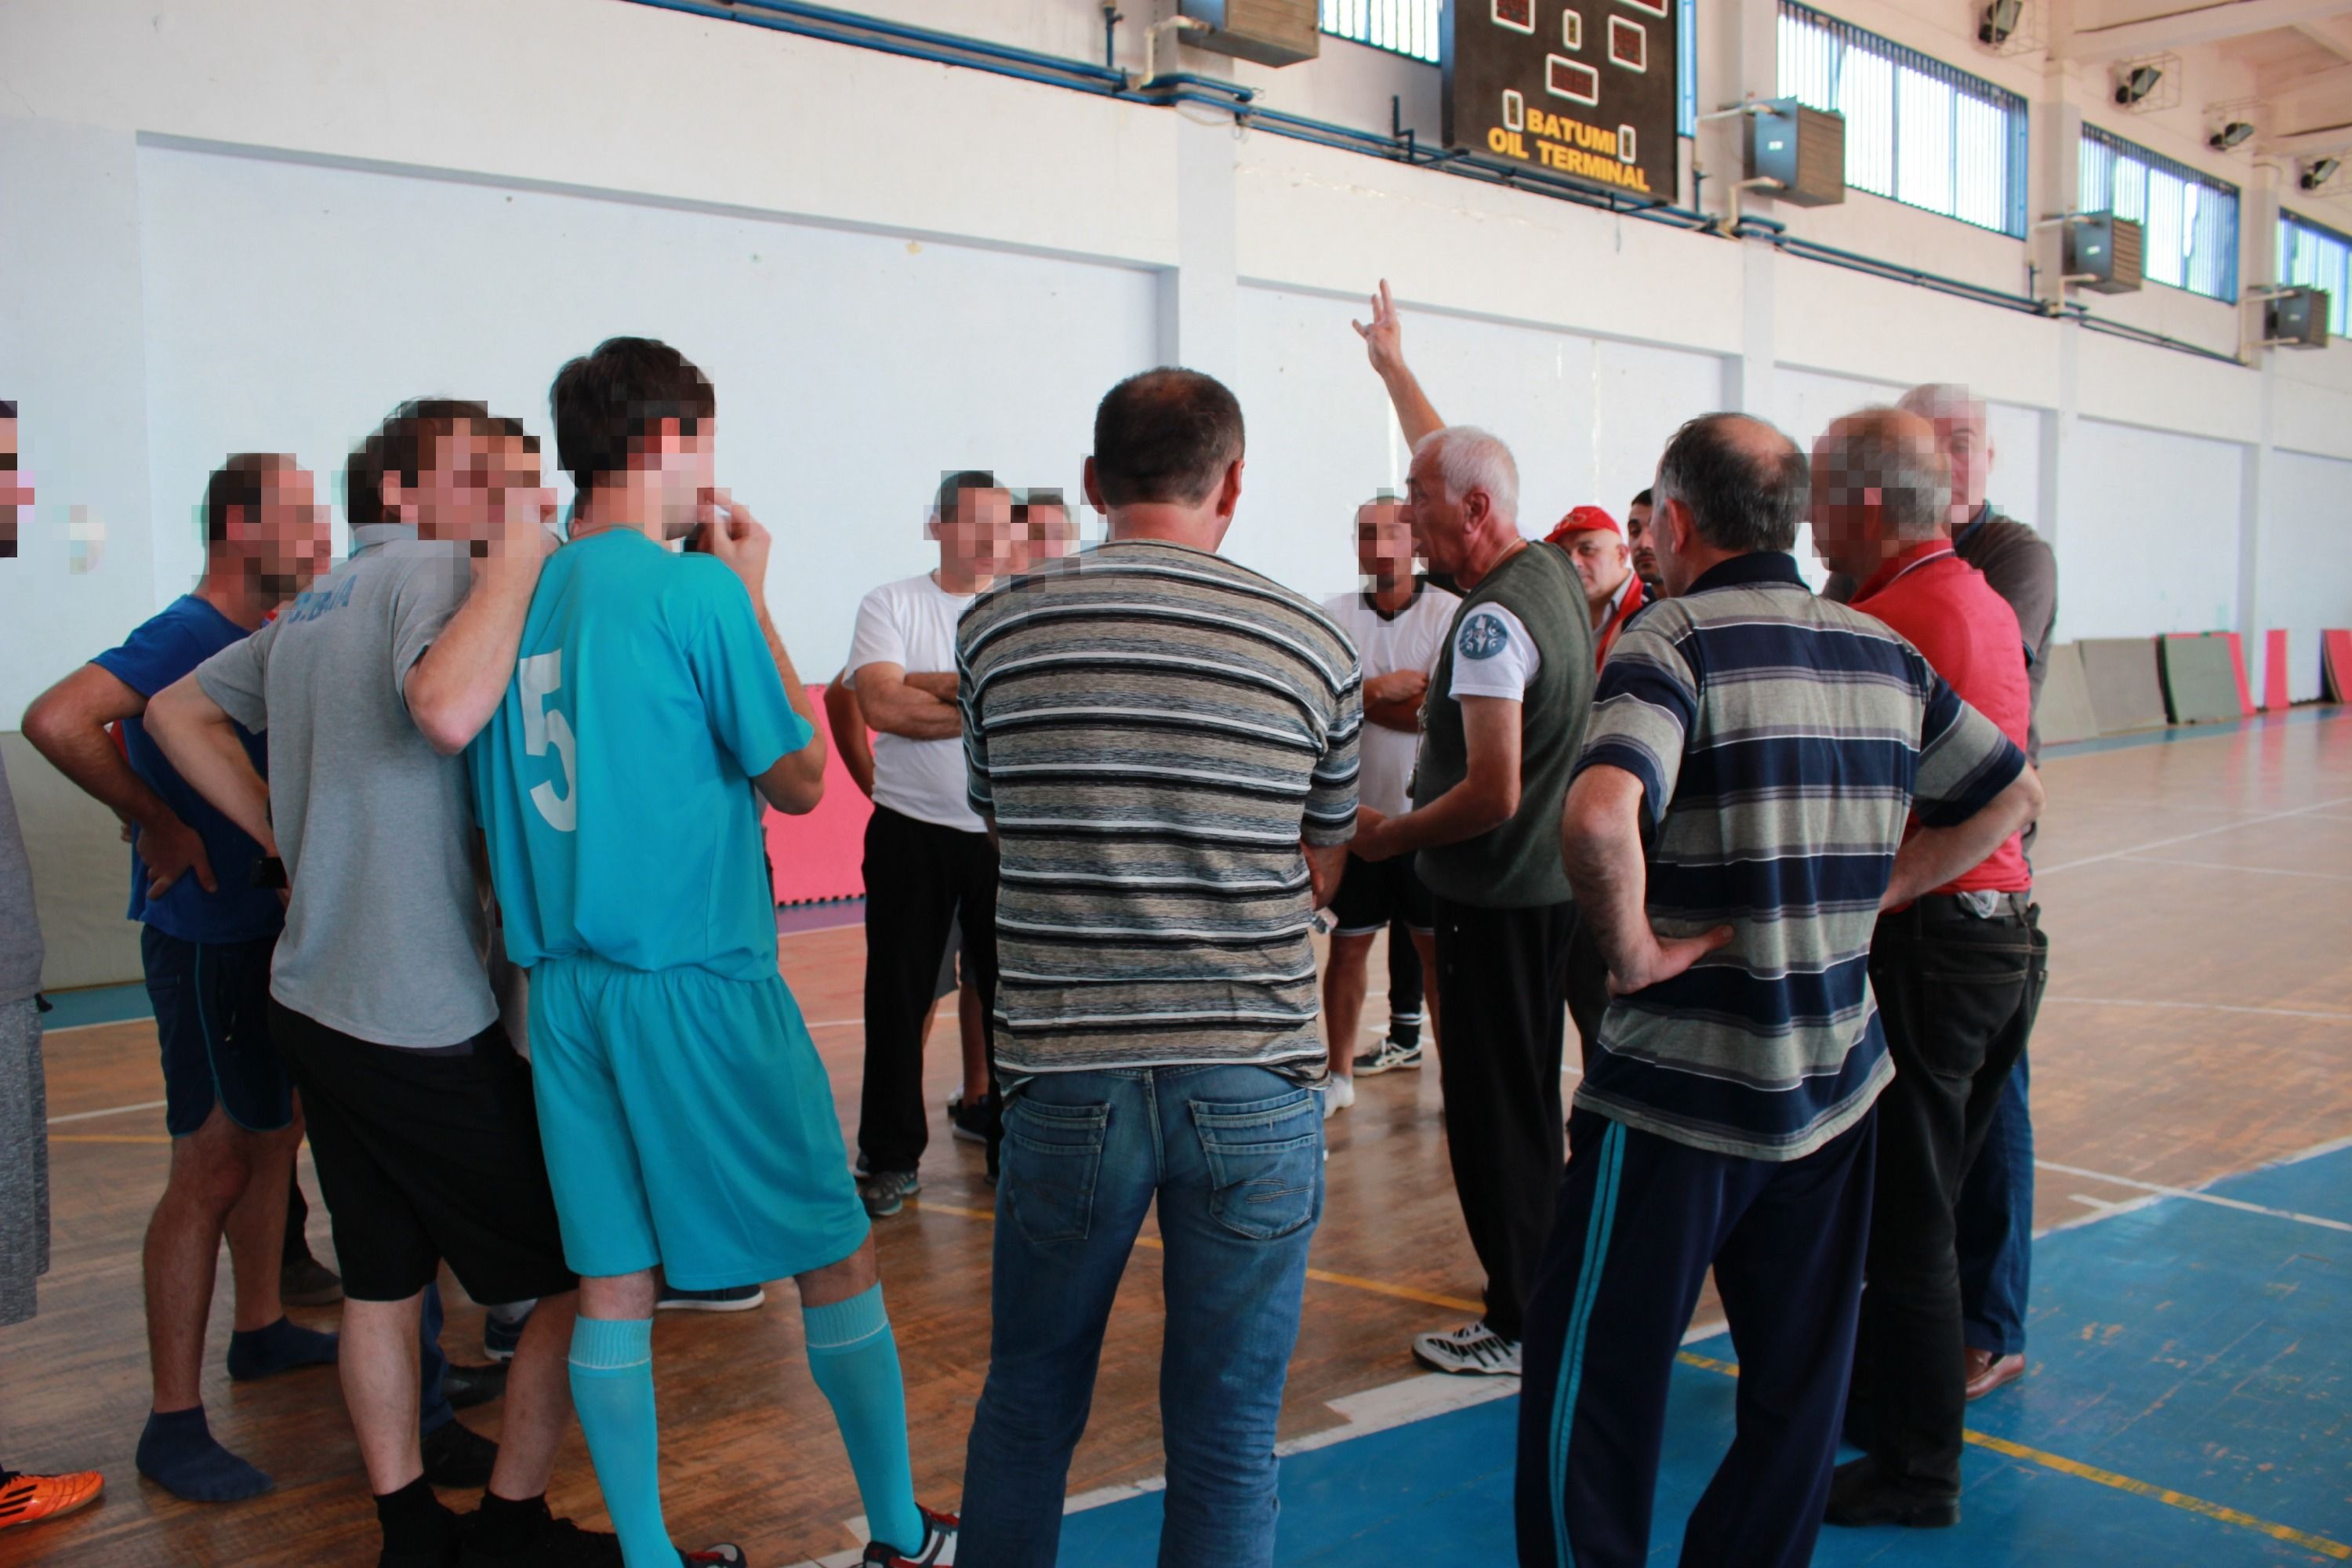 Sport-Entertainment event for former inmates and probationers